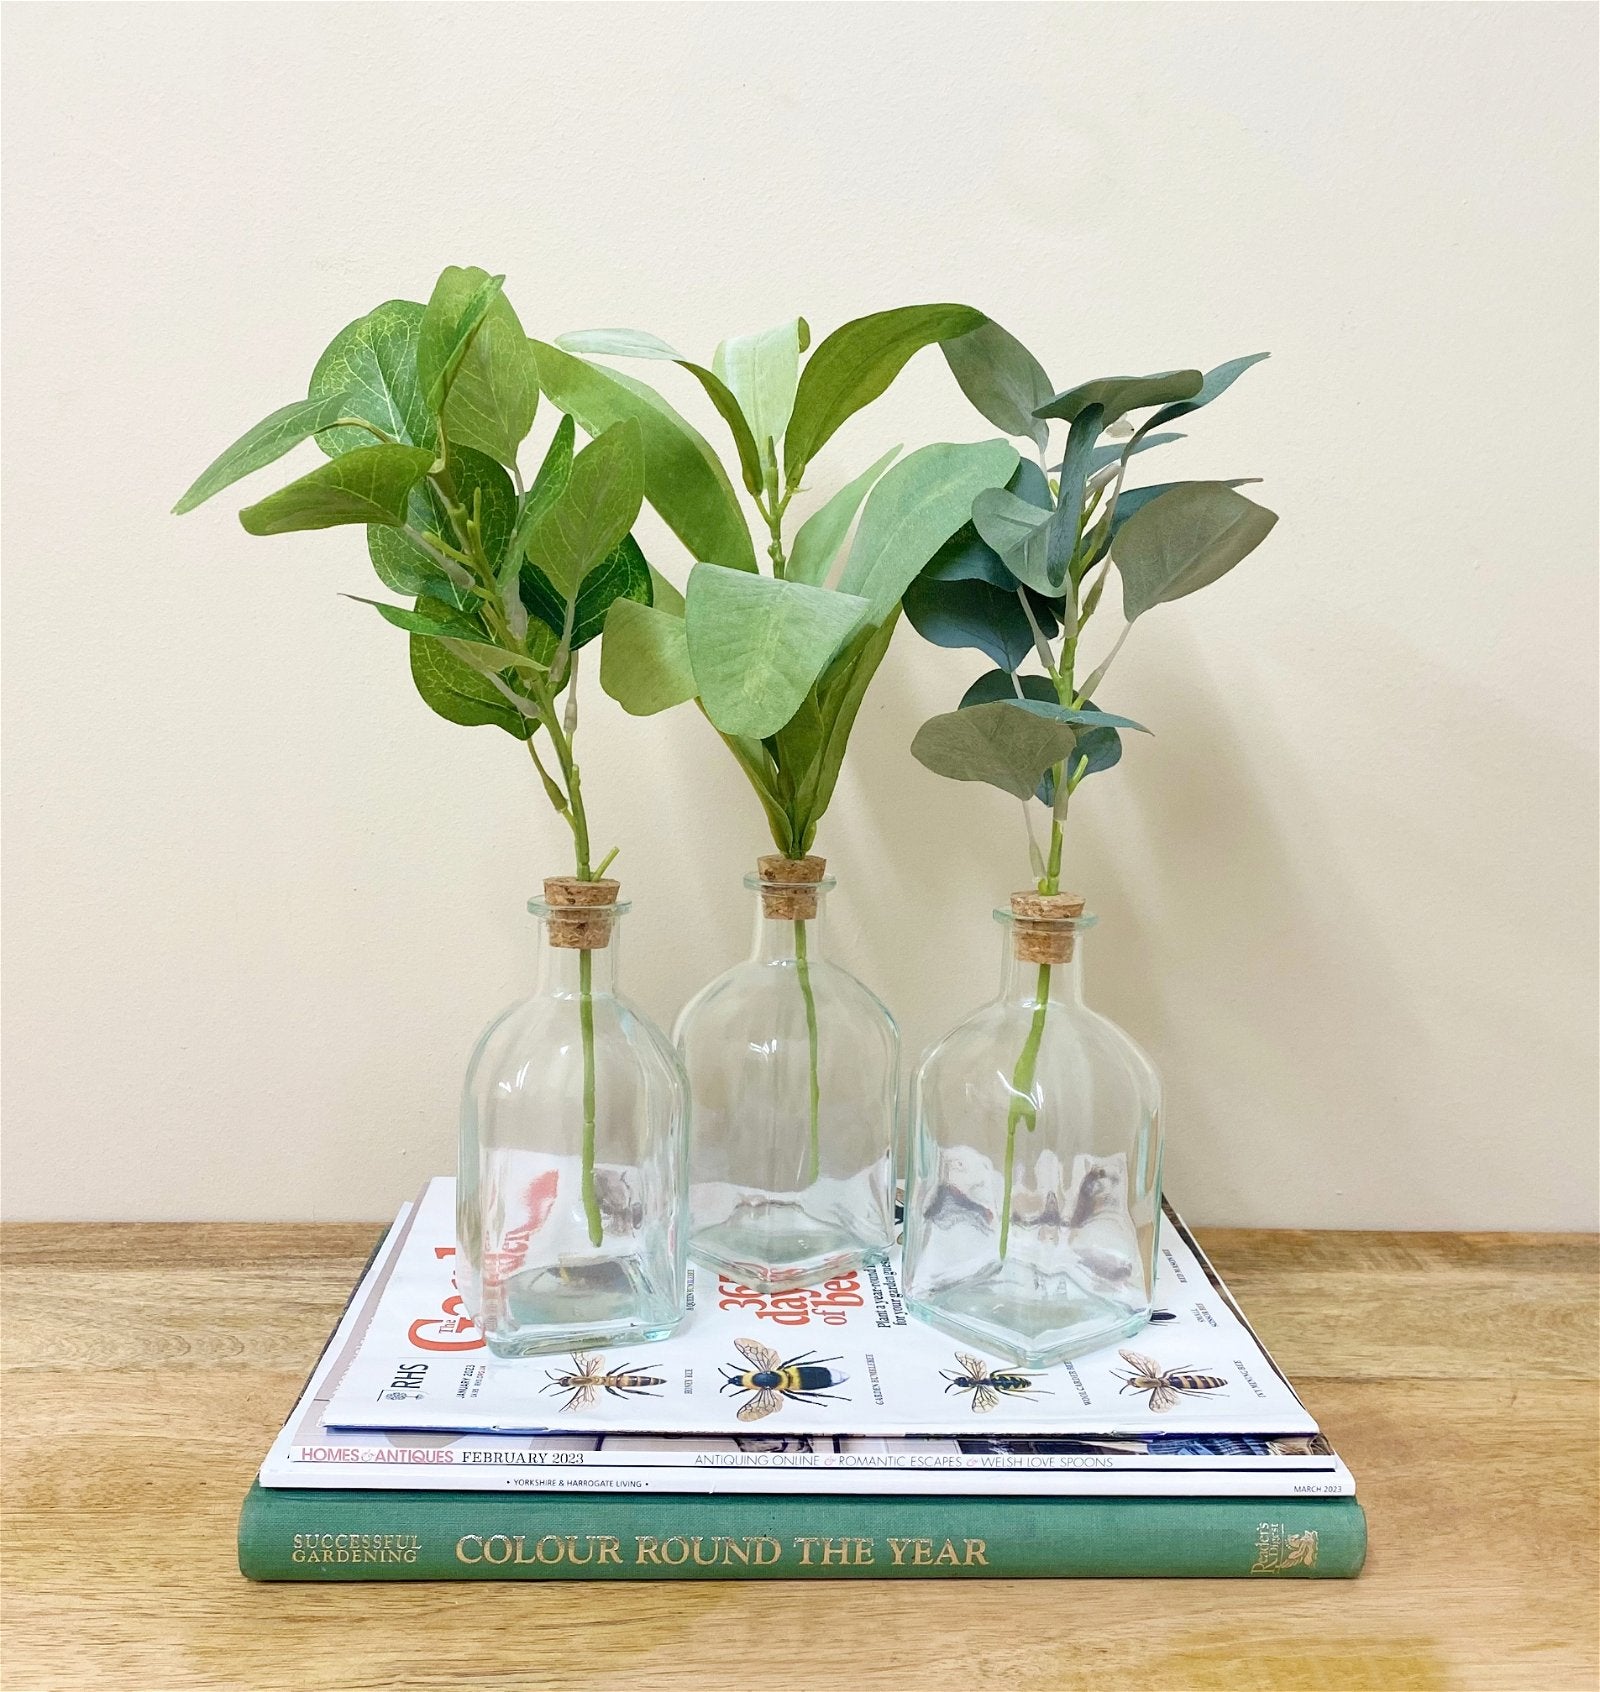 Set of Three Artificial Leaf In Vase - a Cheeky Plant